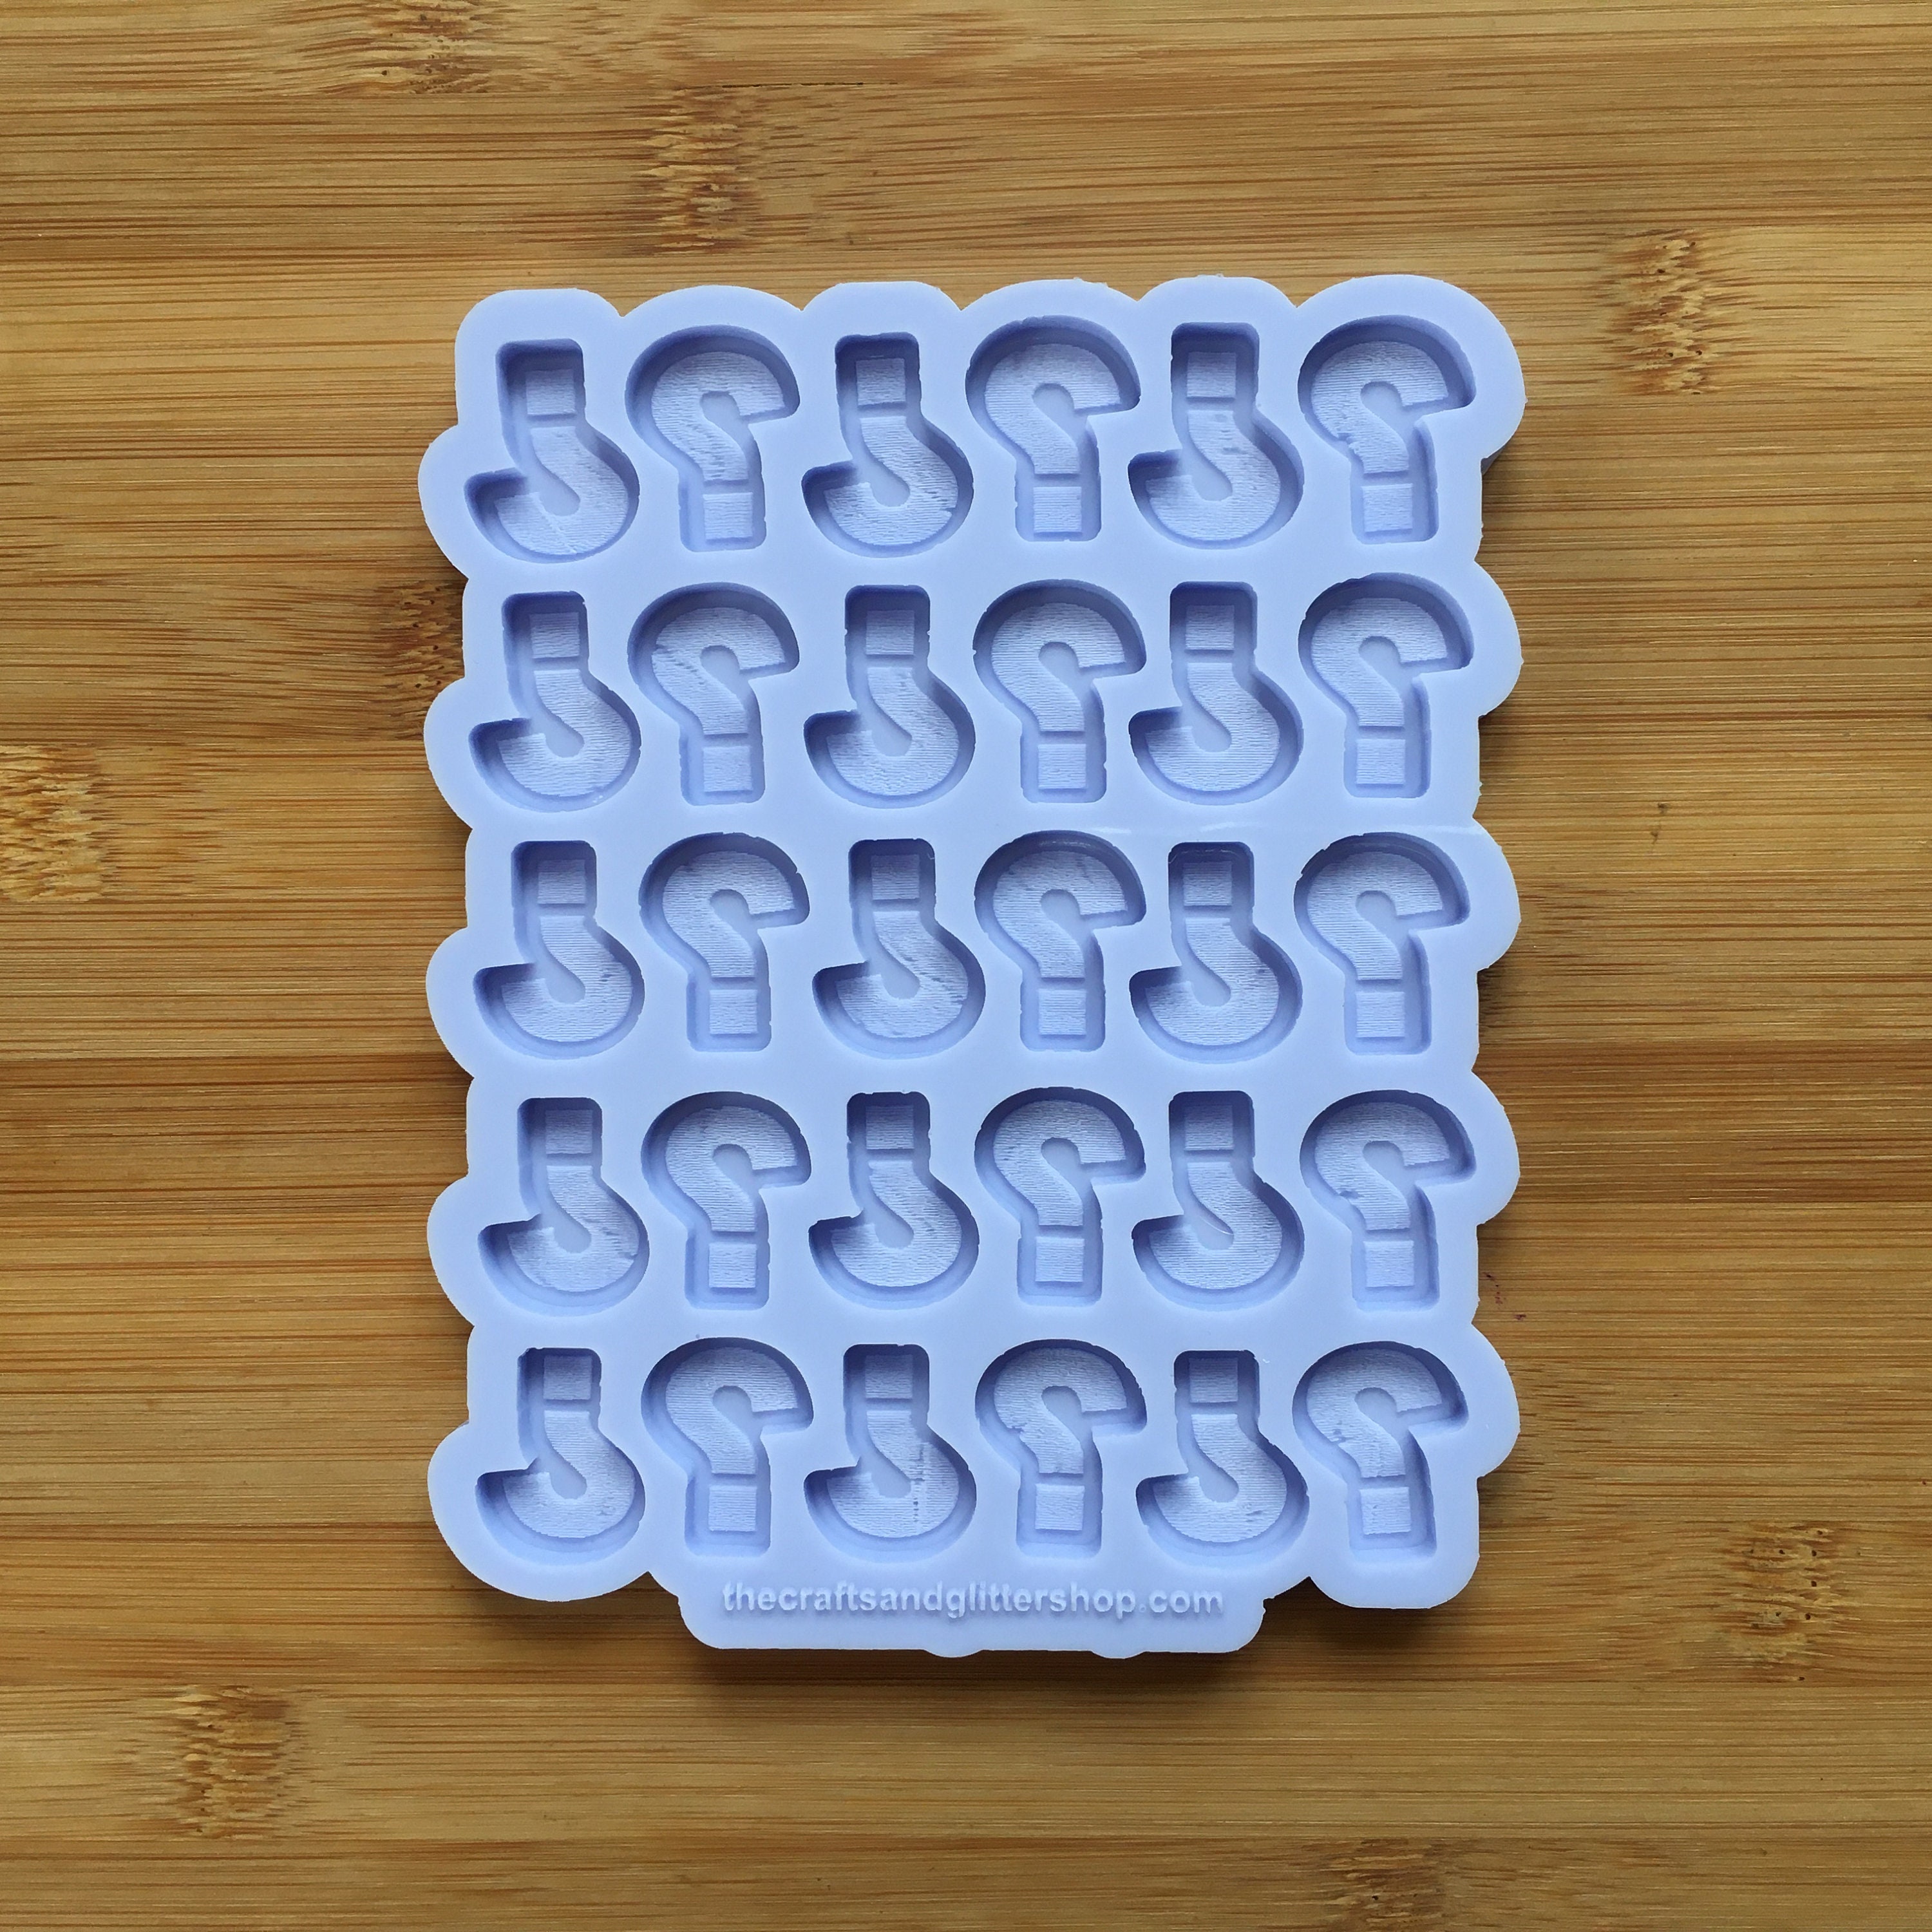 Large Chocolate Drop Candle 1 Cavity Silicone Mold 7008